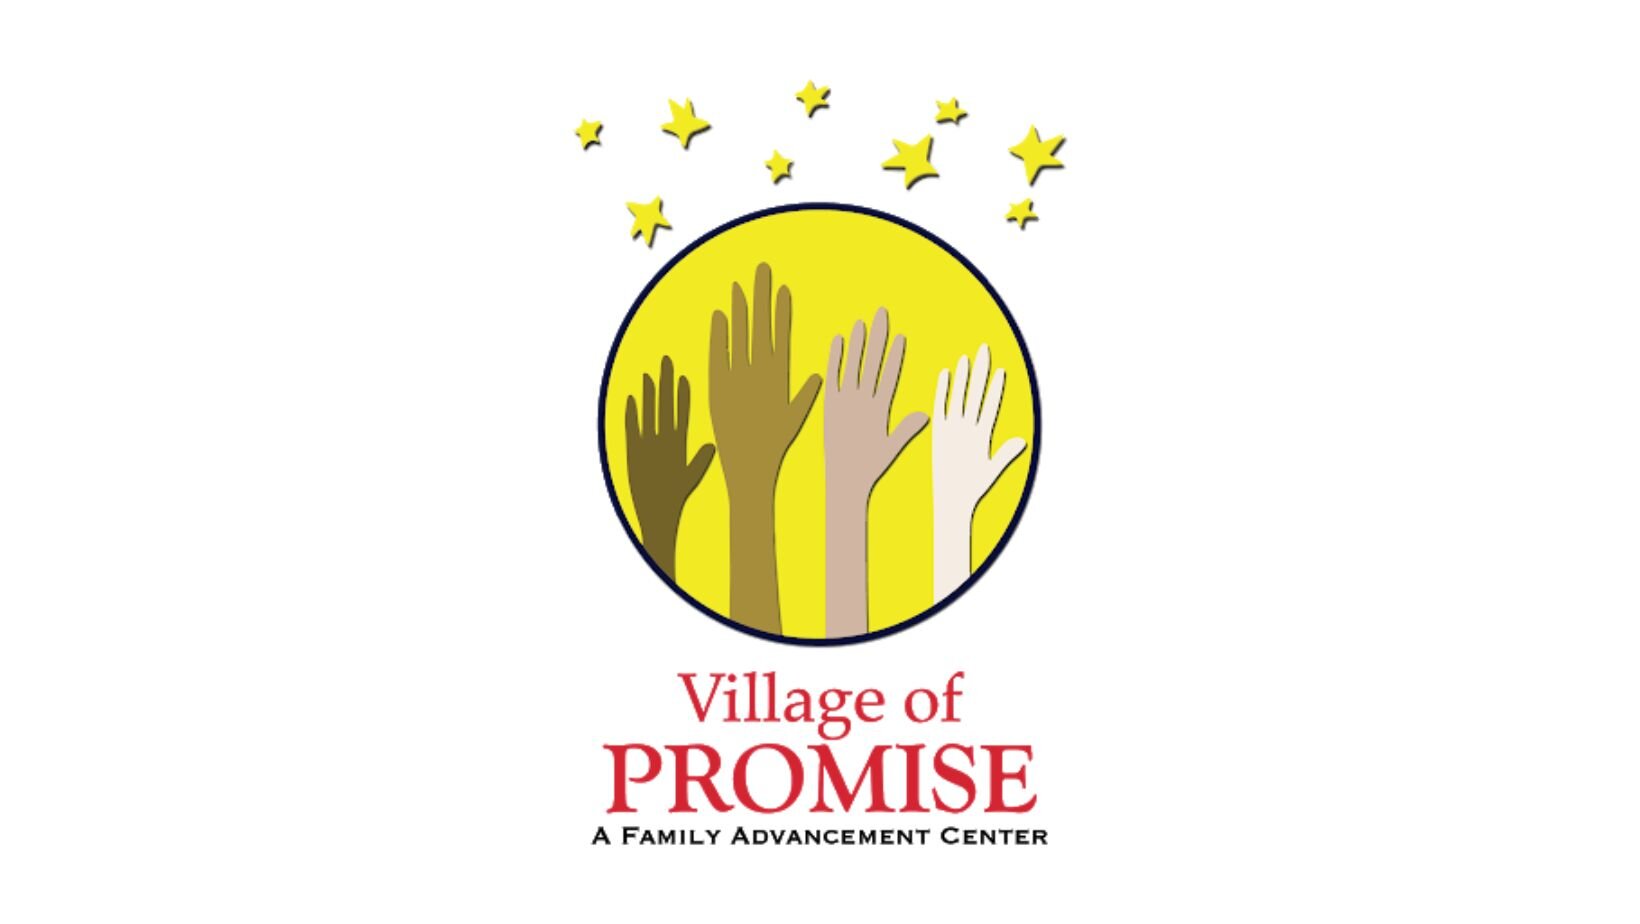 We know there are a lot of good organizations that want your monetary support today for #givingtuesday2022 

But if you need an idea... Village of Promise gets our vote! 😉 Donate using the link in our profile!